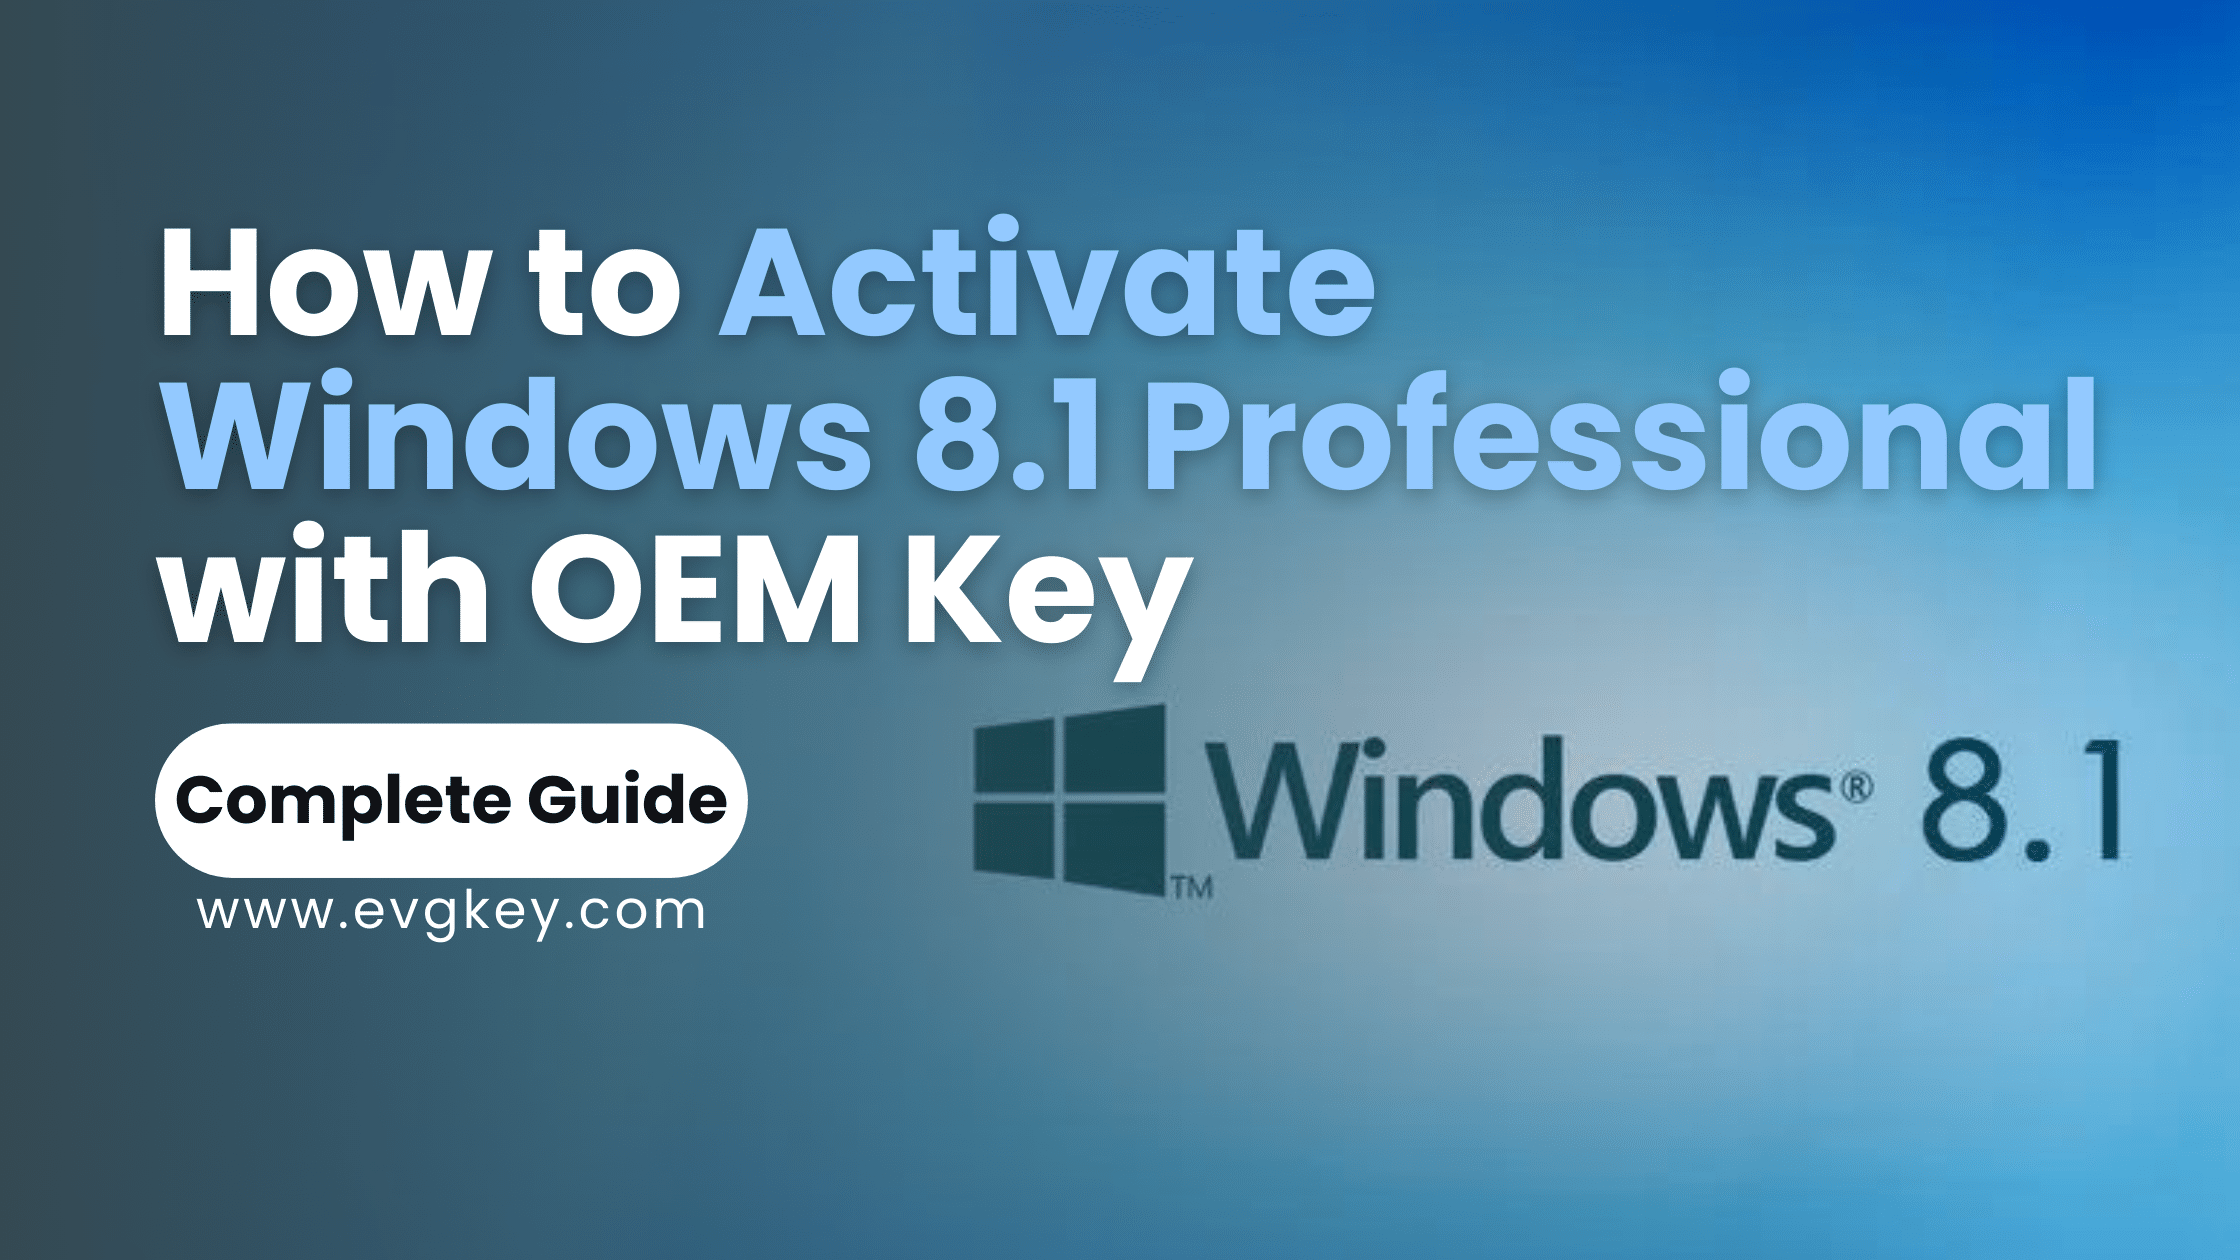 How to Activate Windows 8.1 Professional with OEM Key